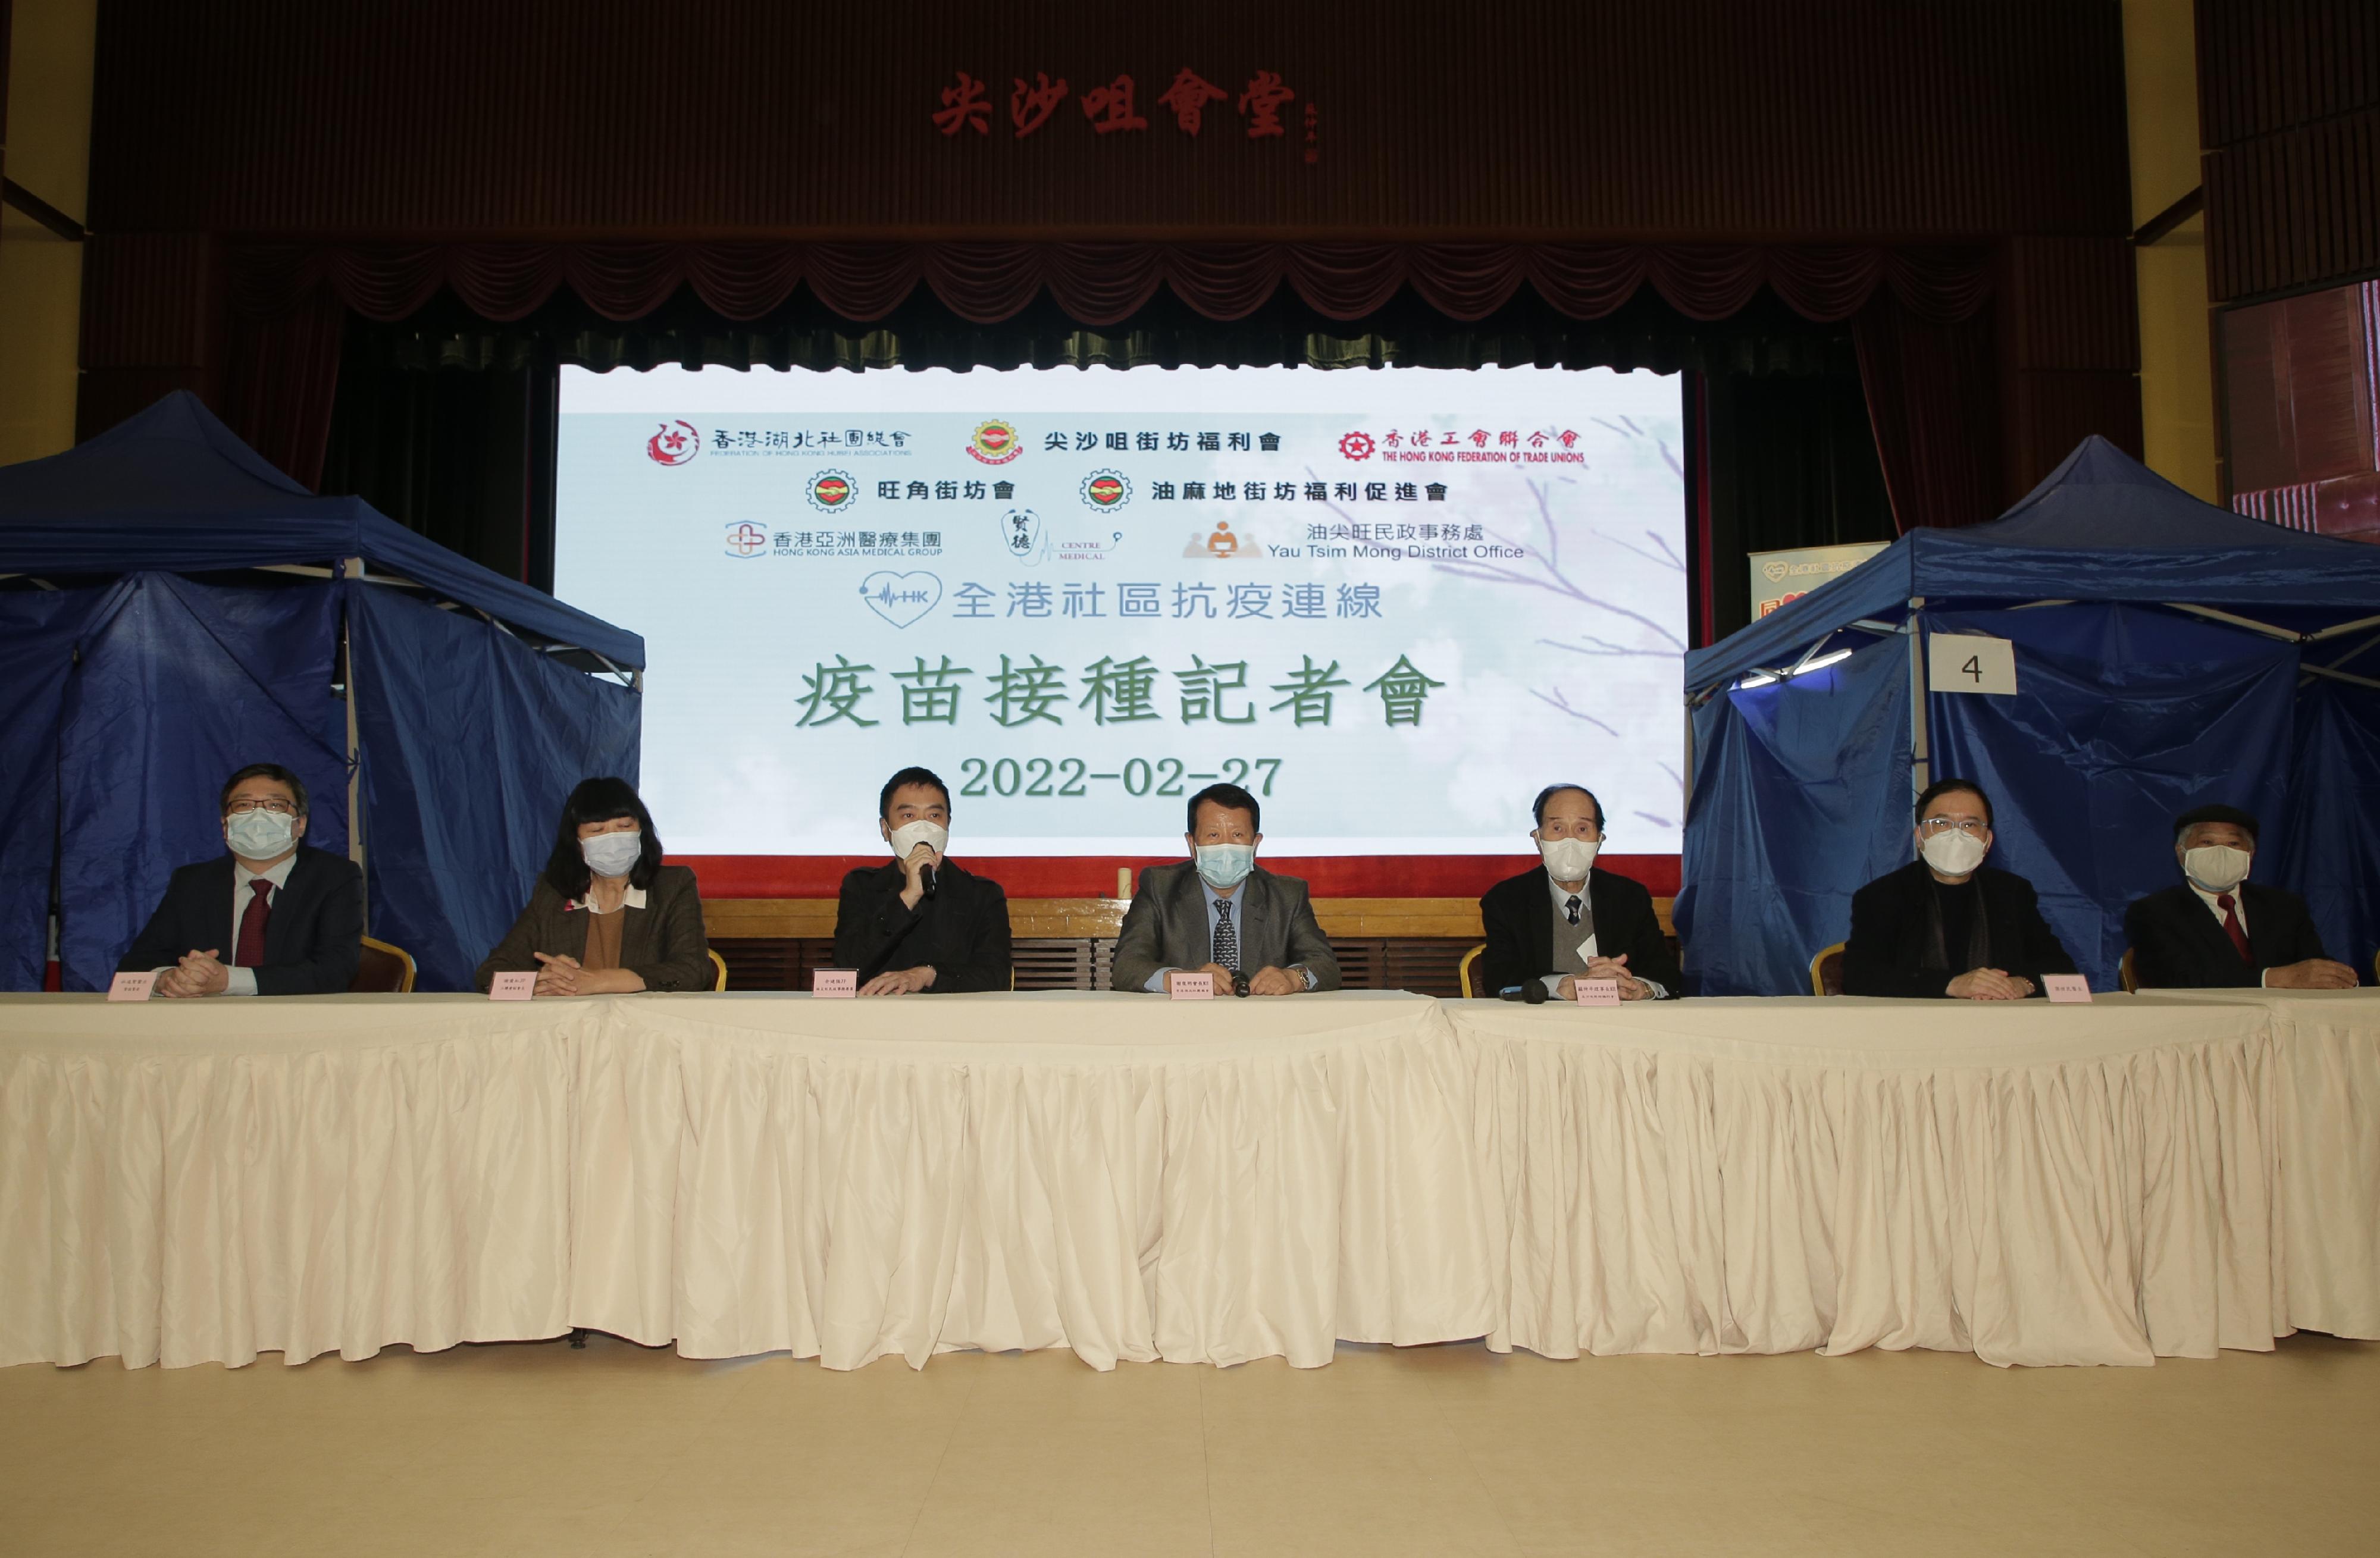 The District Officer (Yau Tsim Mong), Mr Edward Yu, attended a press conference on a vaccination event, introducing the promotion of COVID-19 vaccination at district level and the distribution arrangement of rapid test kits on February 27. Photo shows Vice President of the Hong Kong Federation of Trade Unions Ms Tse Oi-hung (second left); Mr Yu (third left); the Head of the Federation of Hong Kong Hubei Associations, Mr Tse Chun-ming (centre); the Chairman of the Tsim Sha Tsui District Kai Fong Welfare Association, Mr So Chung-ping (third right); Dr Sigmund Leung (second right) and representatives of other organisers at the press conference.